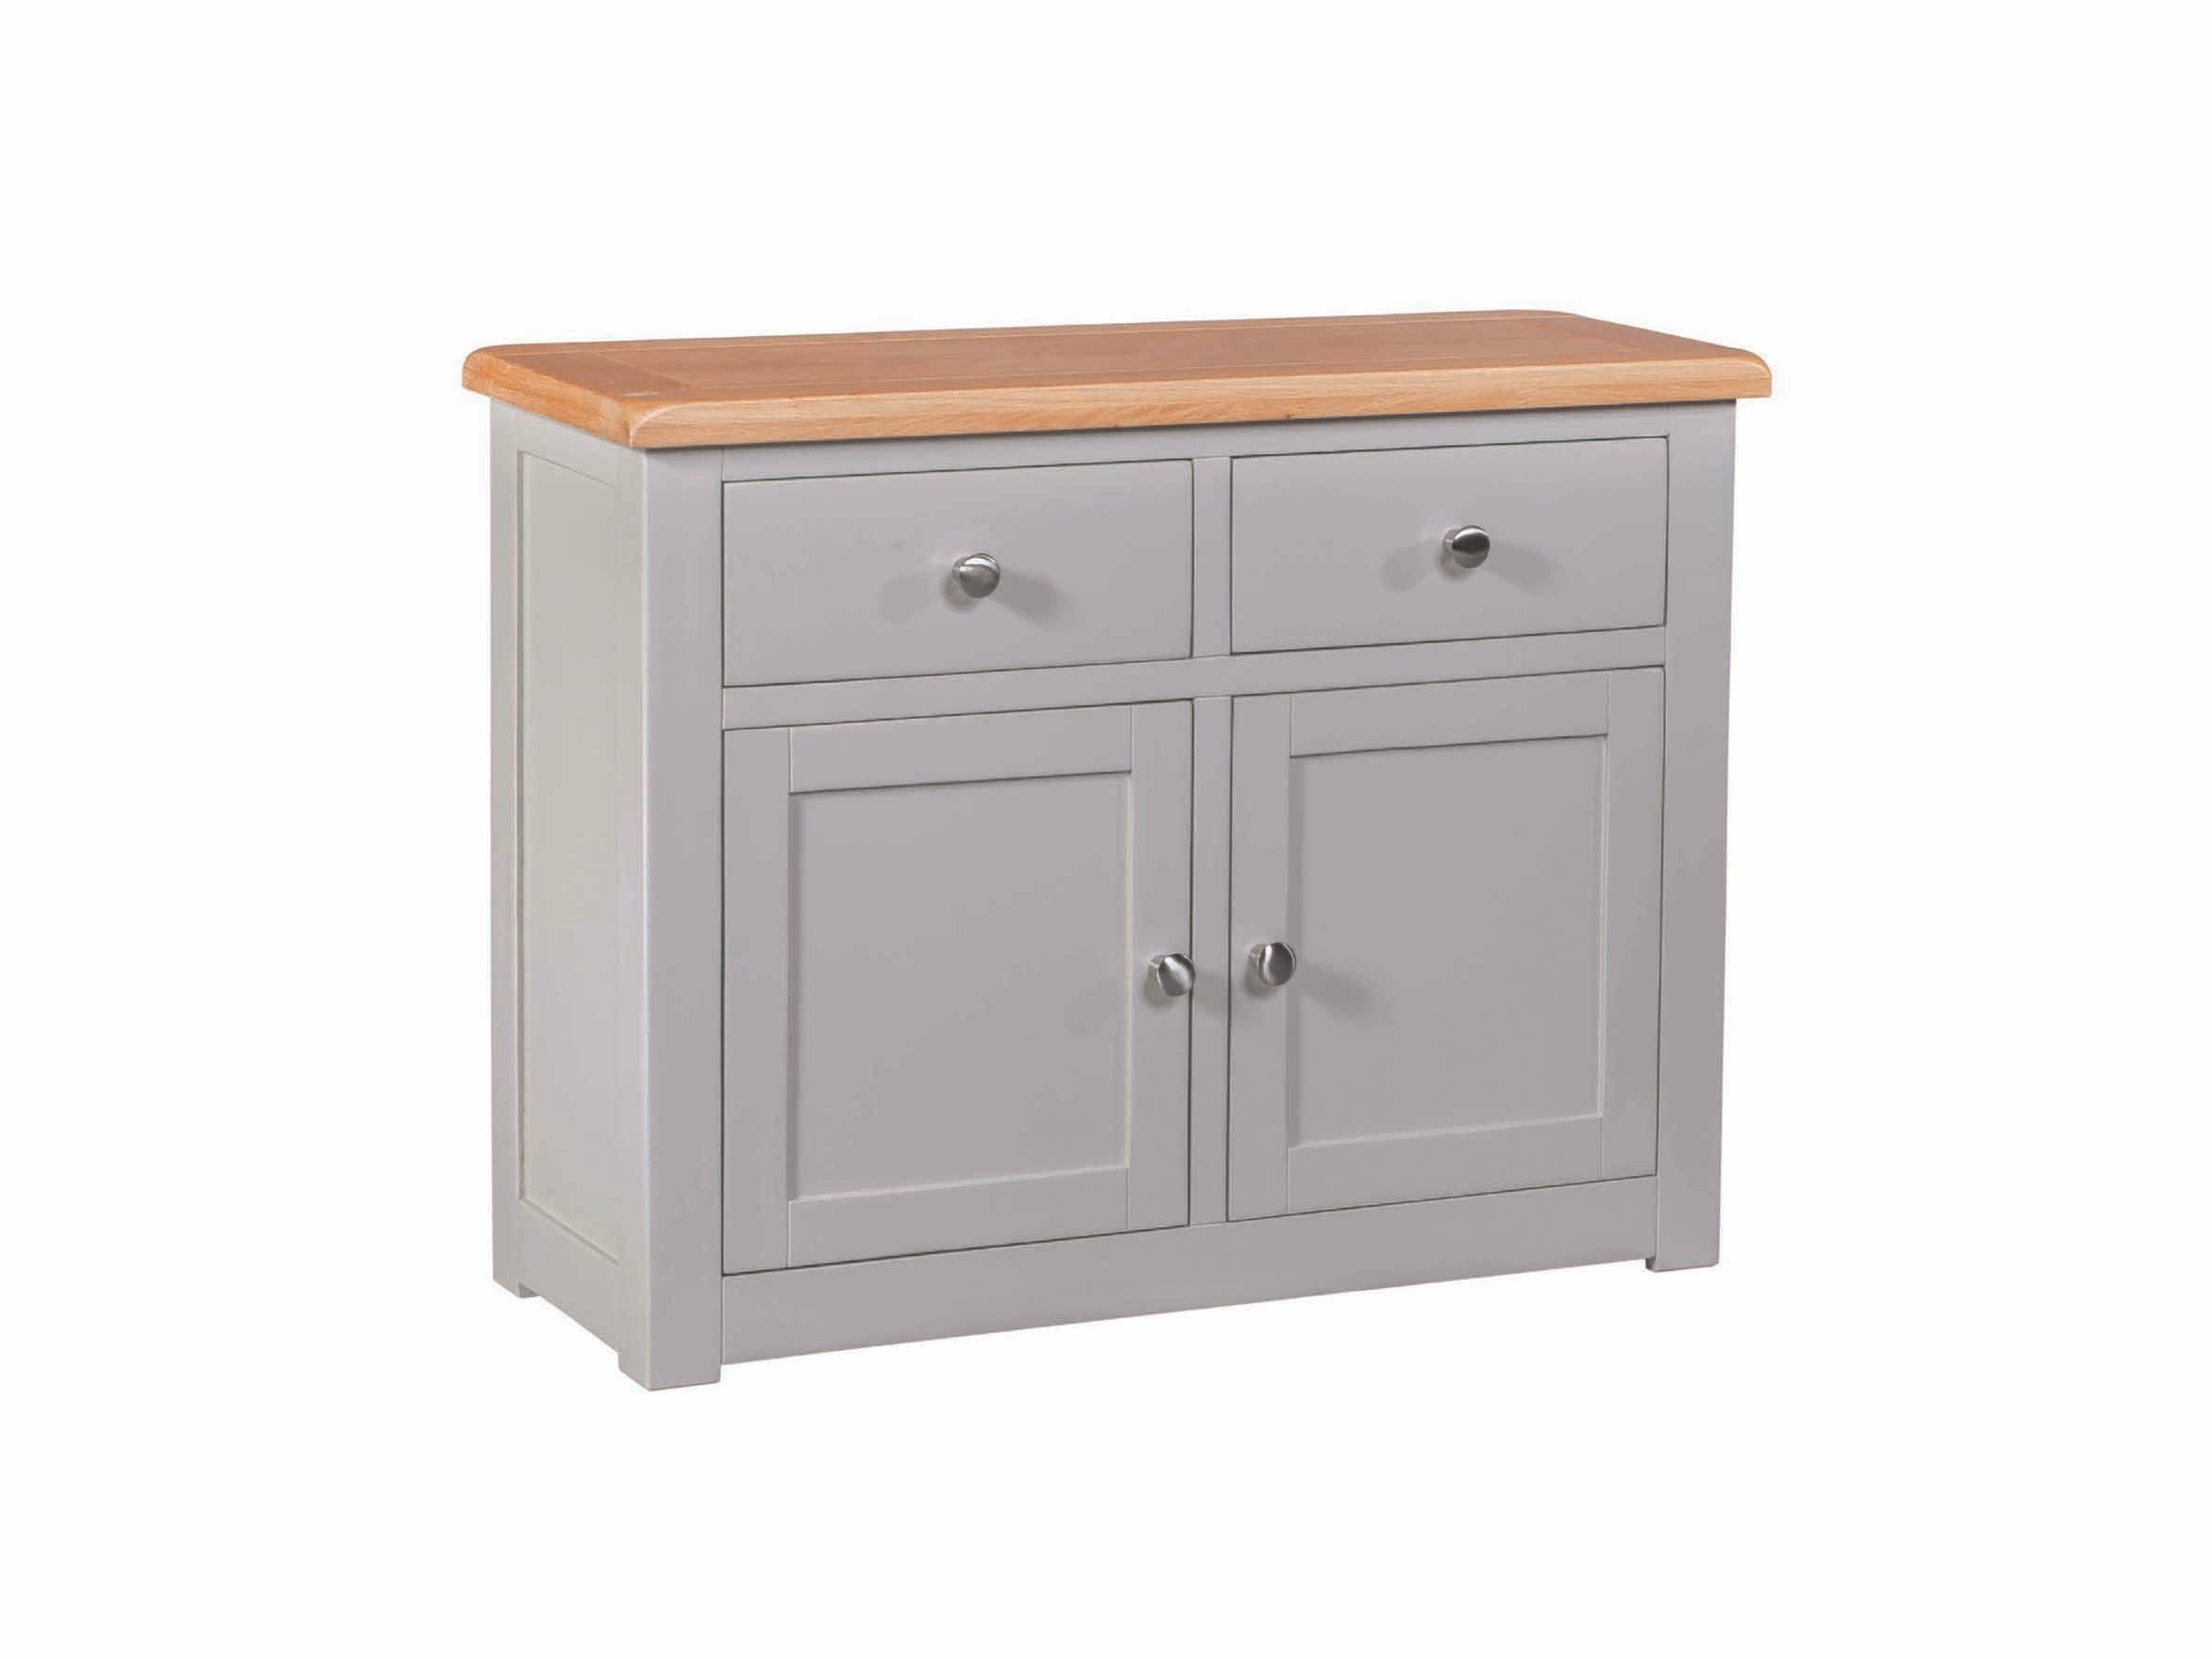 Stone Small Sideboard Contemporary Grey Furniture